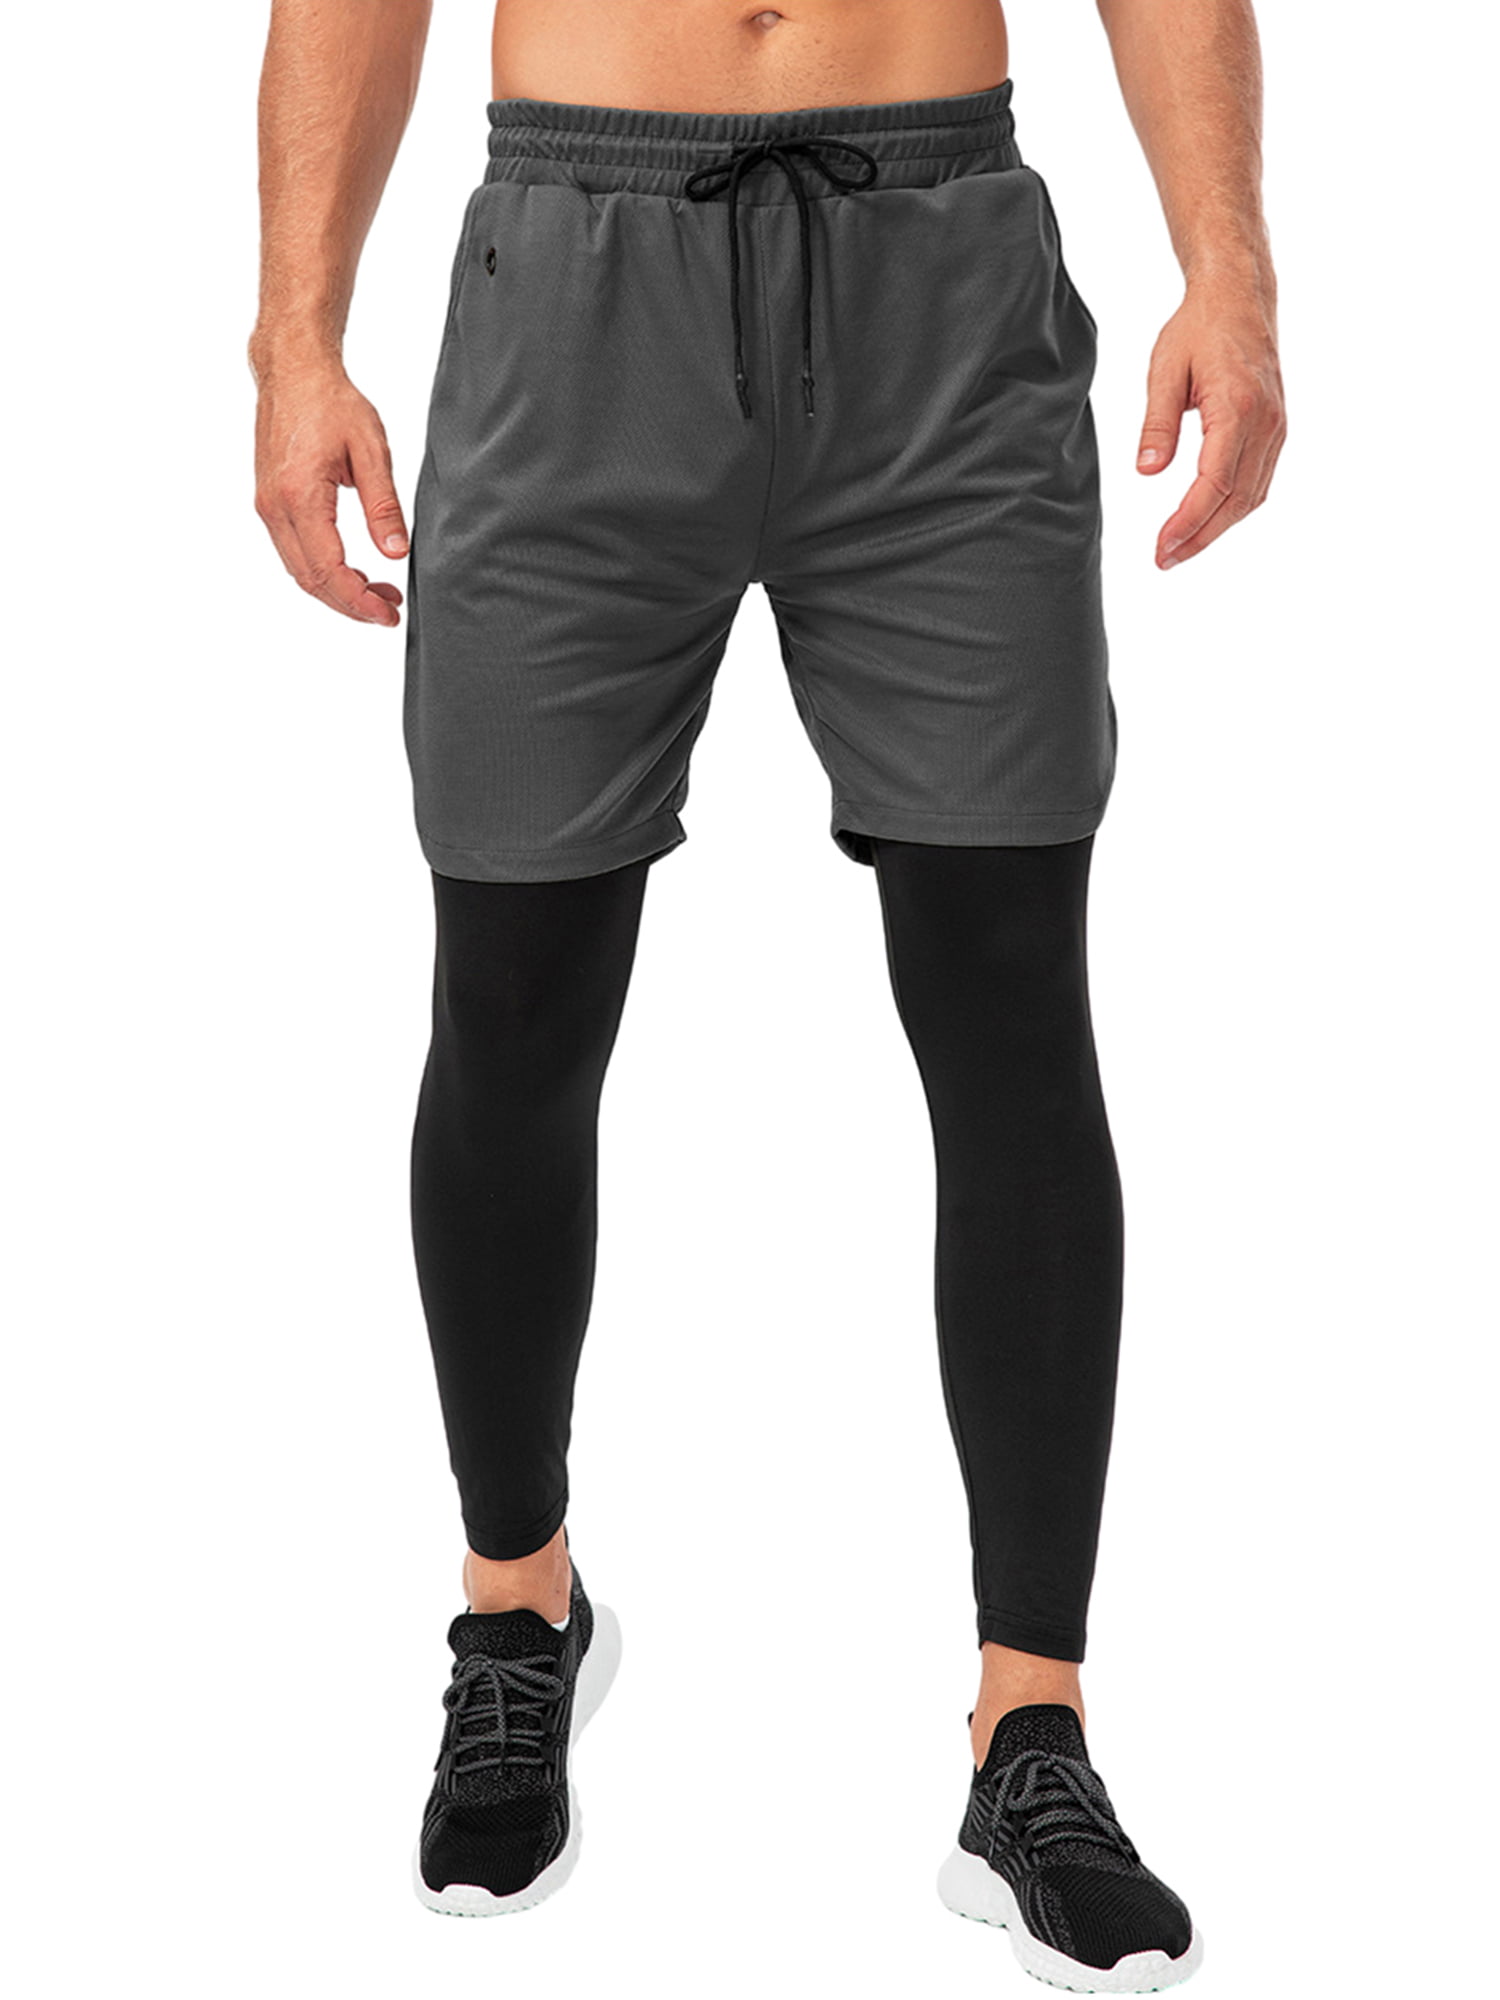  Men's 2 in 1 Running Pants, Gym Workout Compression Pants for  Men Training Athletic Pants Black : Clothing, Shoes & Jewelry